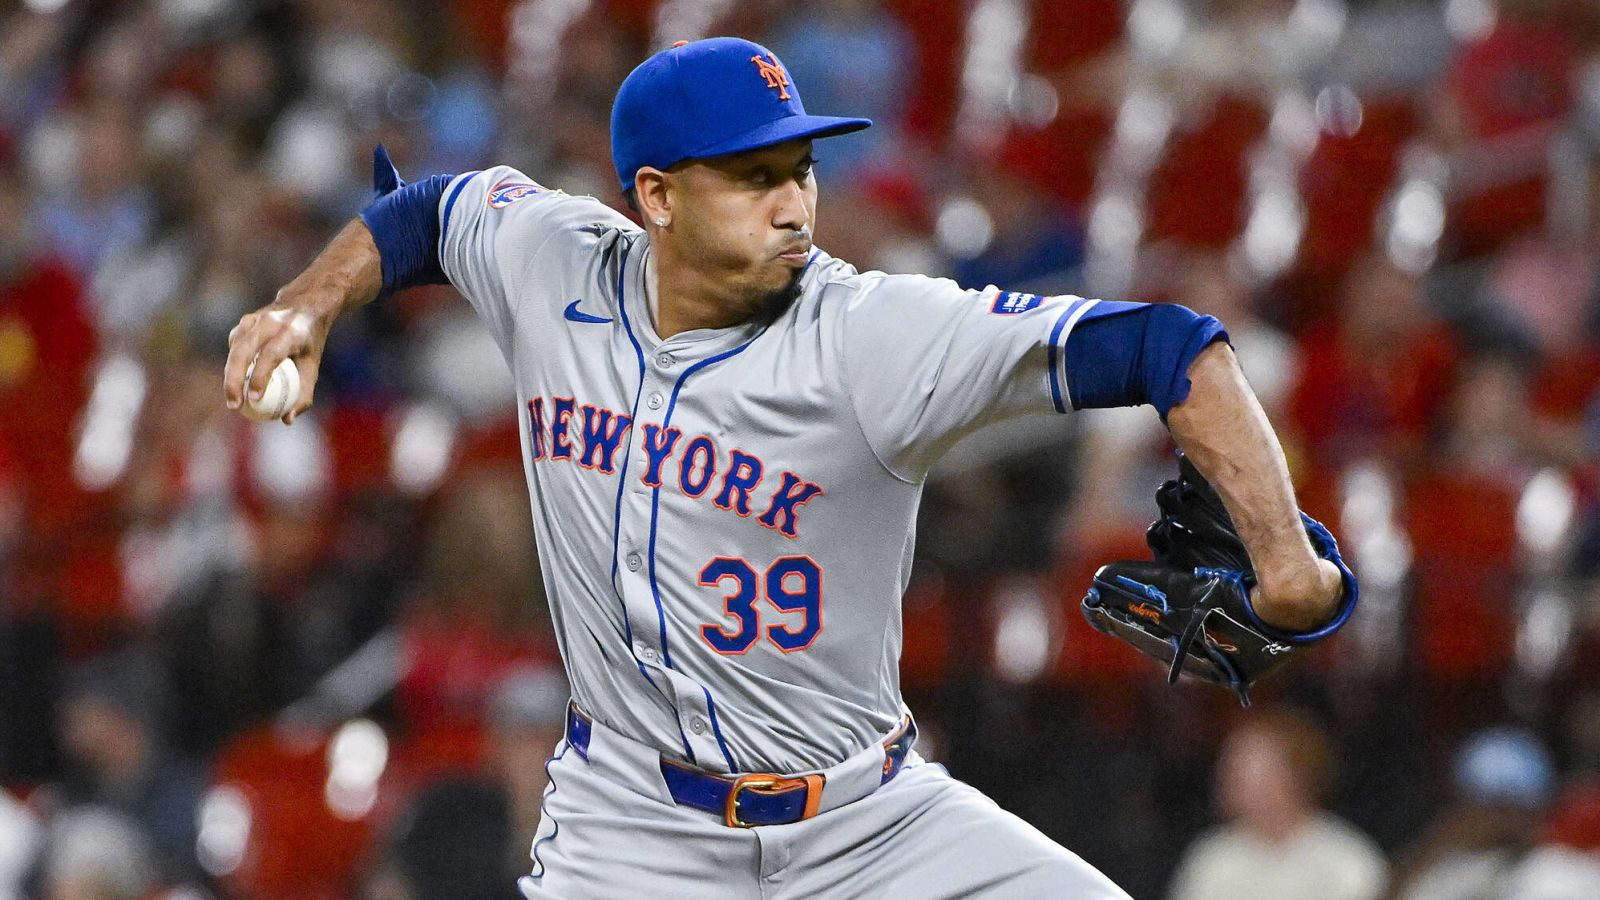 Mets star closer is losing confidence after giving up four-run lead: ‘I’m open to anything’